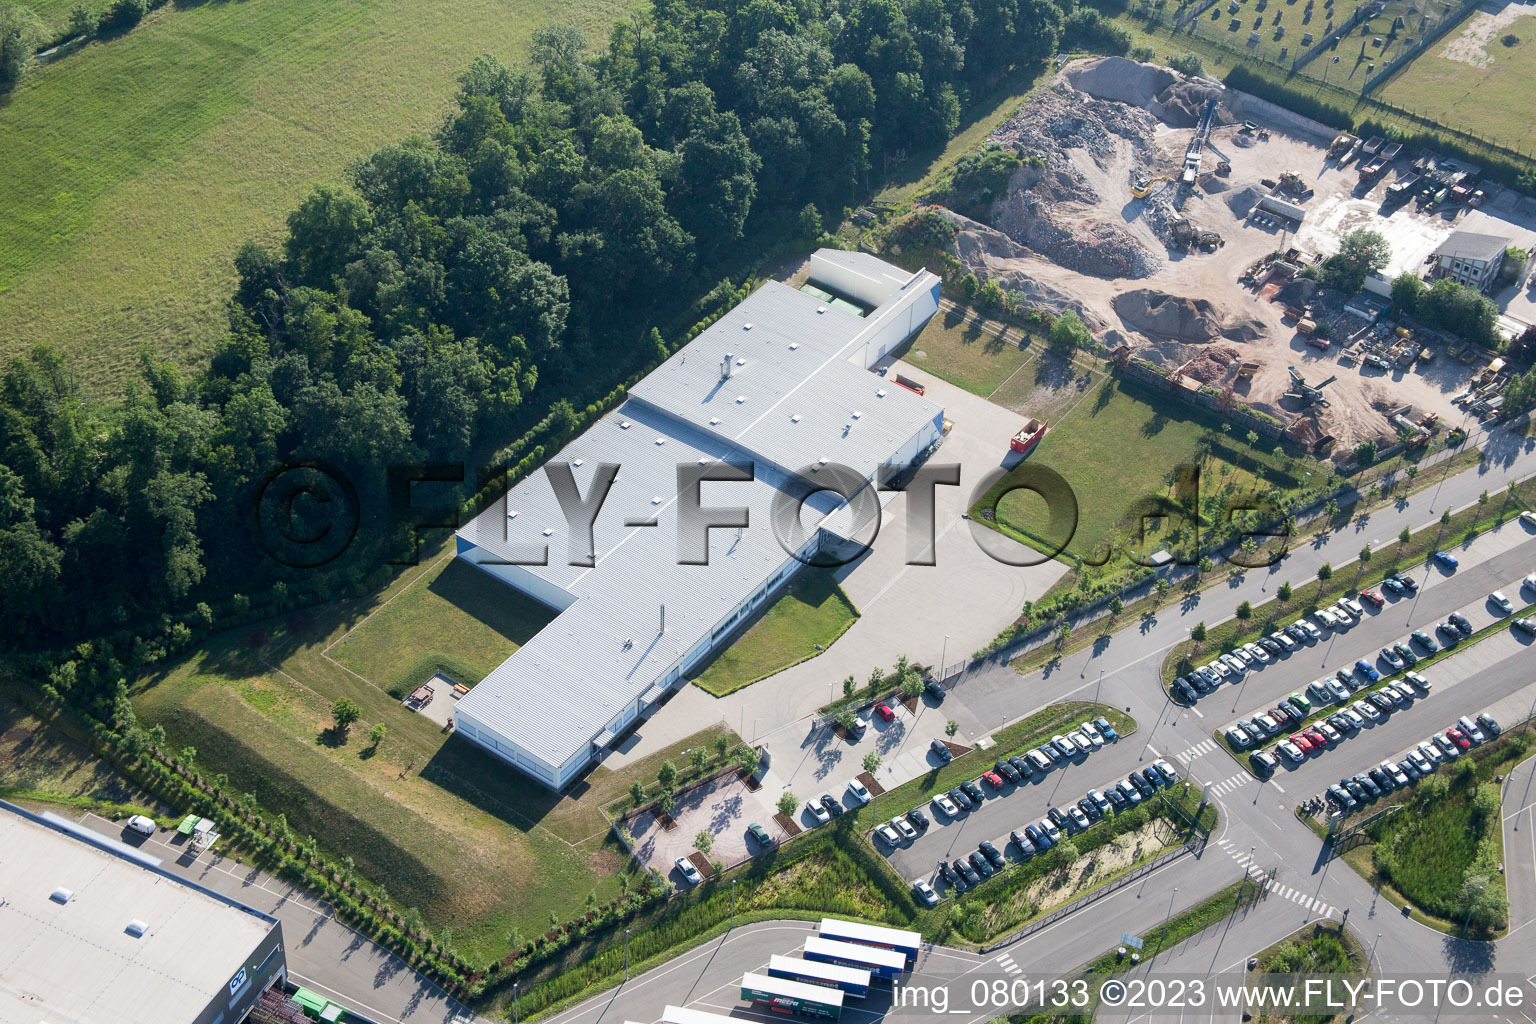 Horst industrial estate, Alfa Aesar GmbH in the district Minderslachen in Kandel in the state Rhineland-Palatinate, Germany from the drone perspective